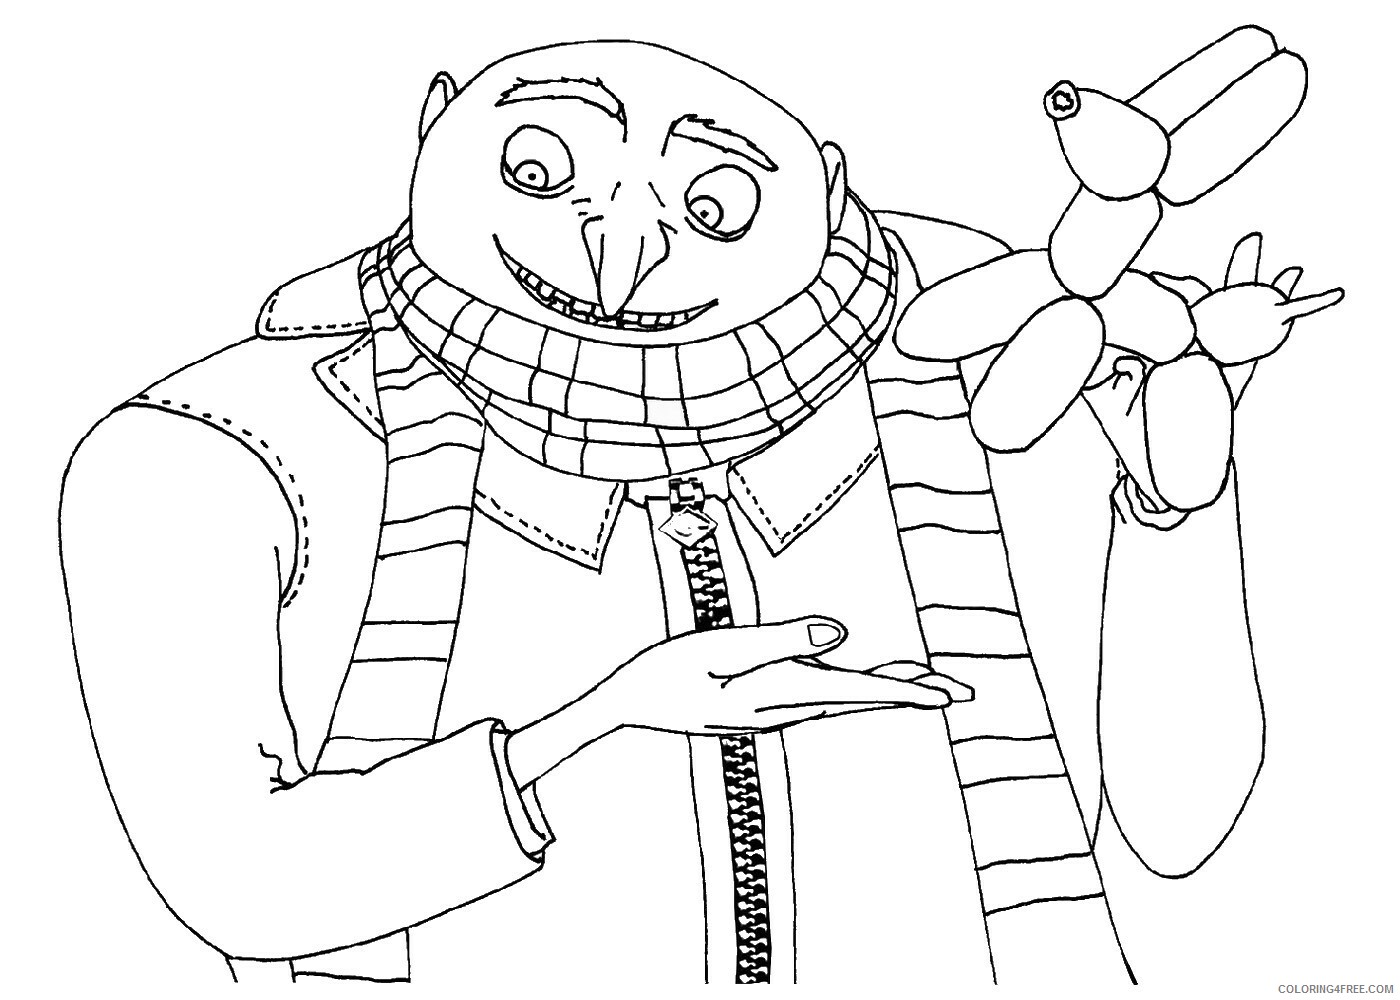 Despicable Me Coloring Pages - Coloring4Free.com